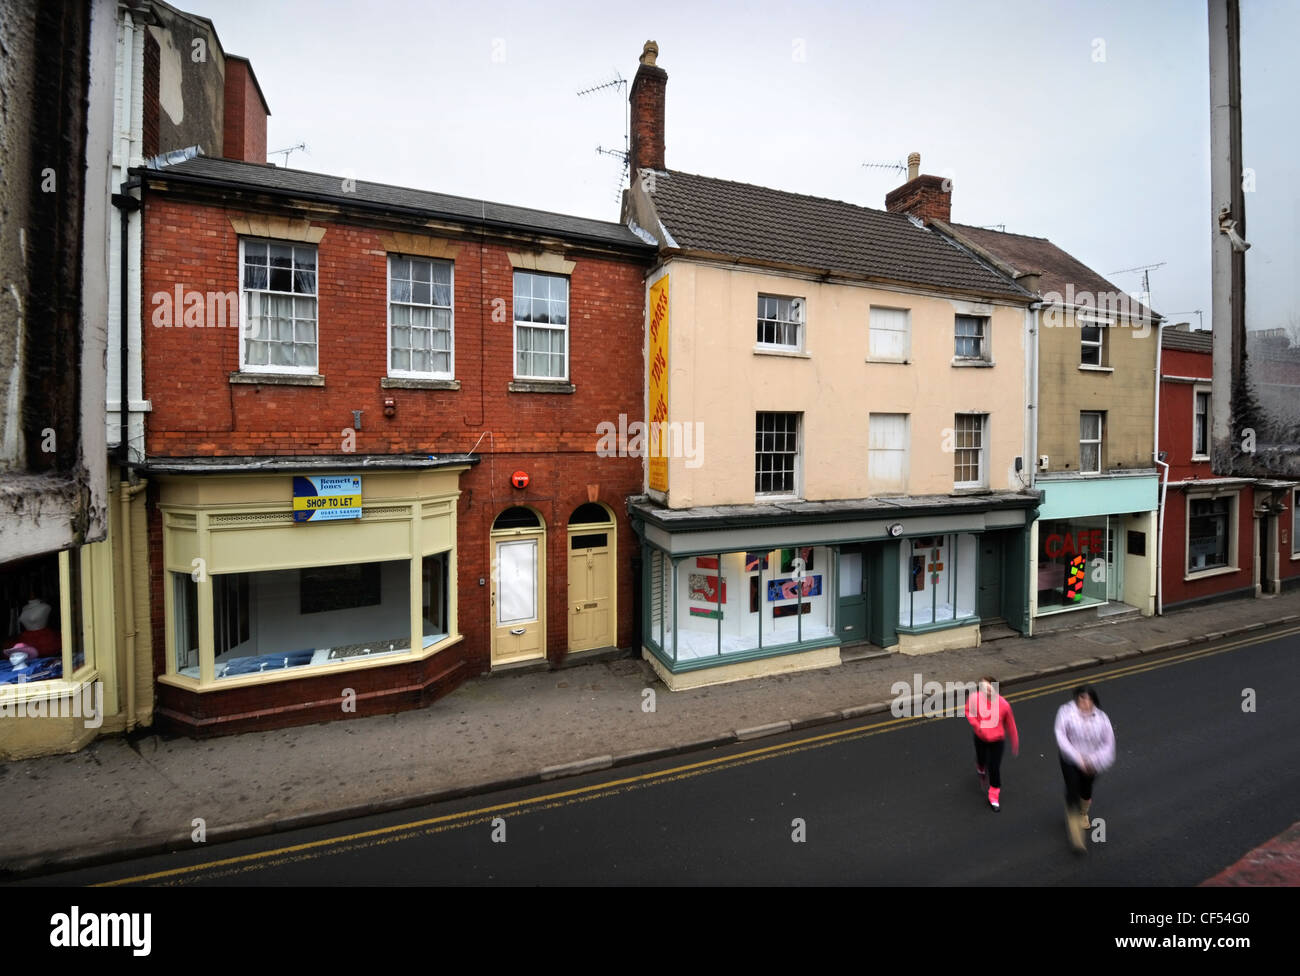 View of unoccupied shops in temporary use as art galleries in Dursley, Gloucestershire, UK Stock Photo